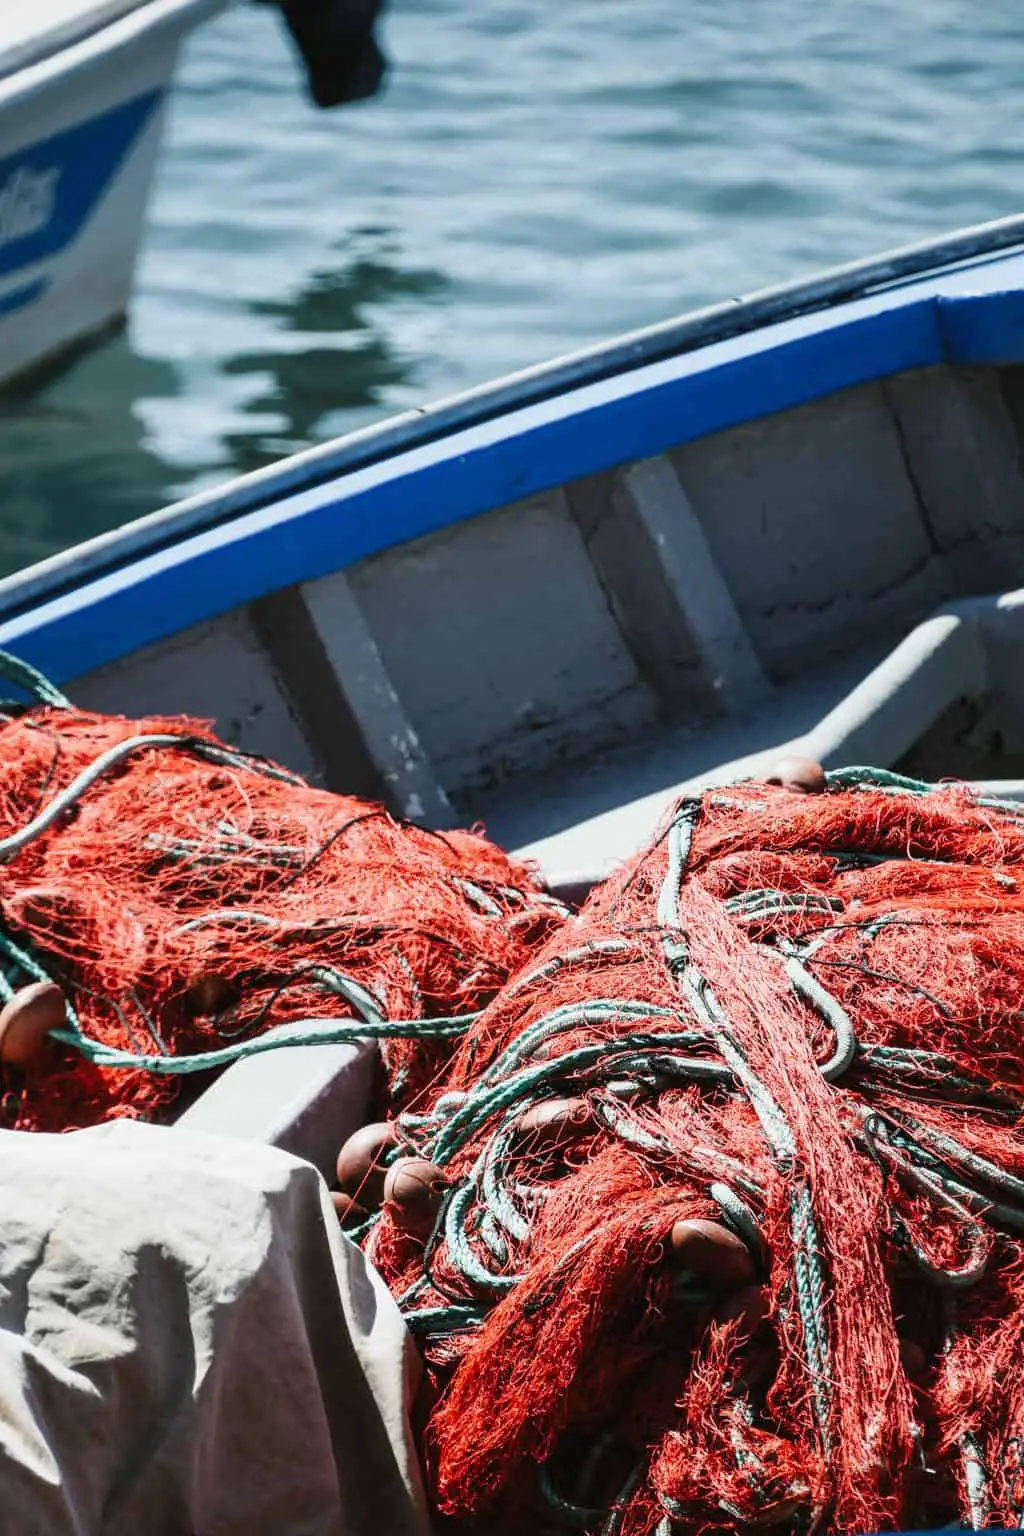 What is Drag Net Fishing? A red net on a fishing boat.